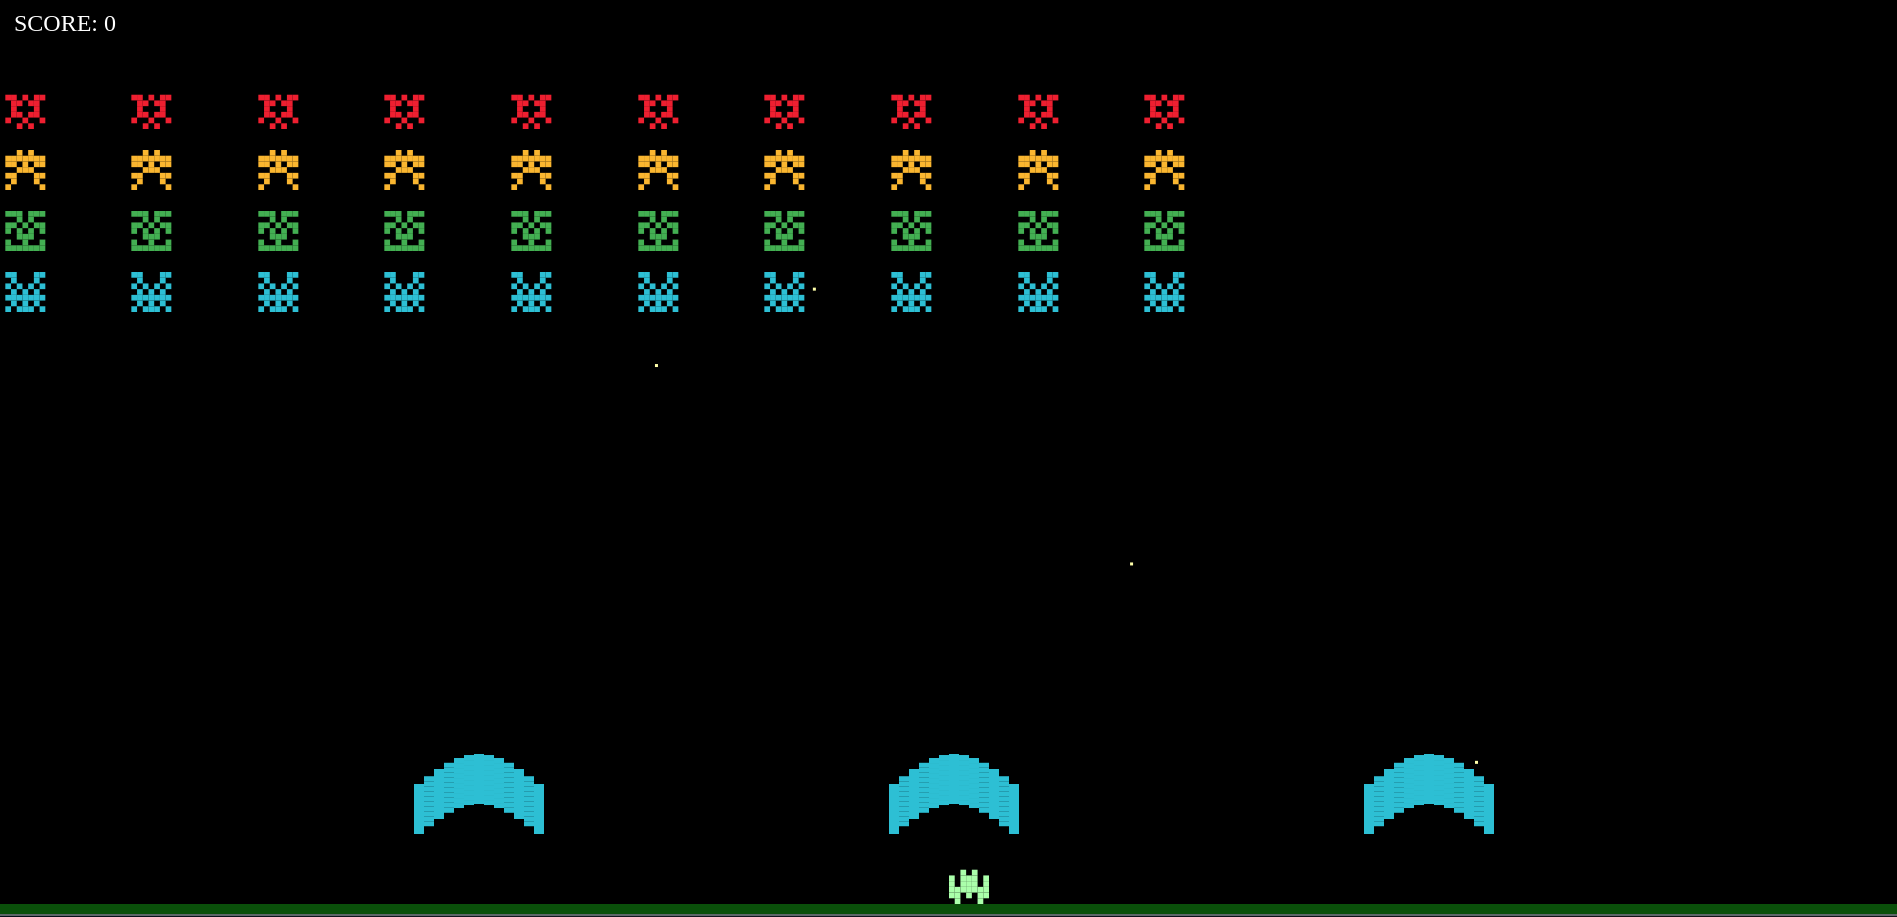 Space Invaders Released